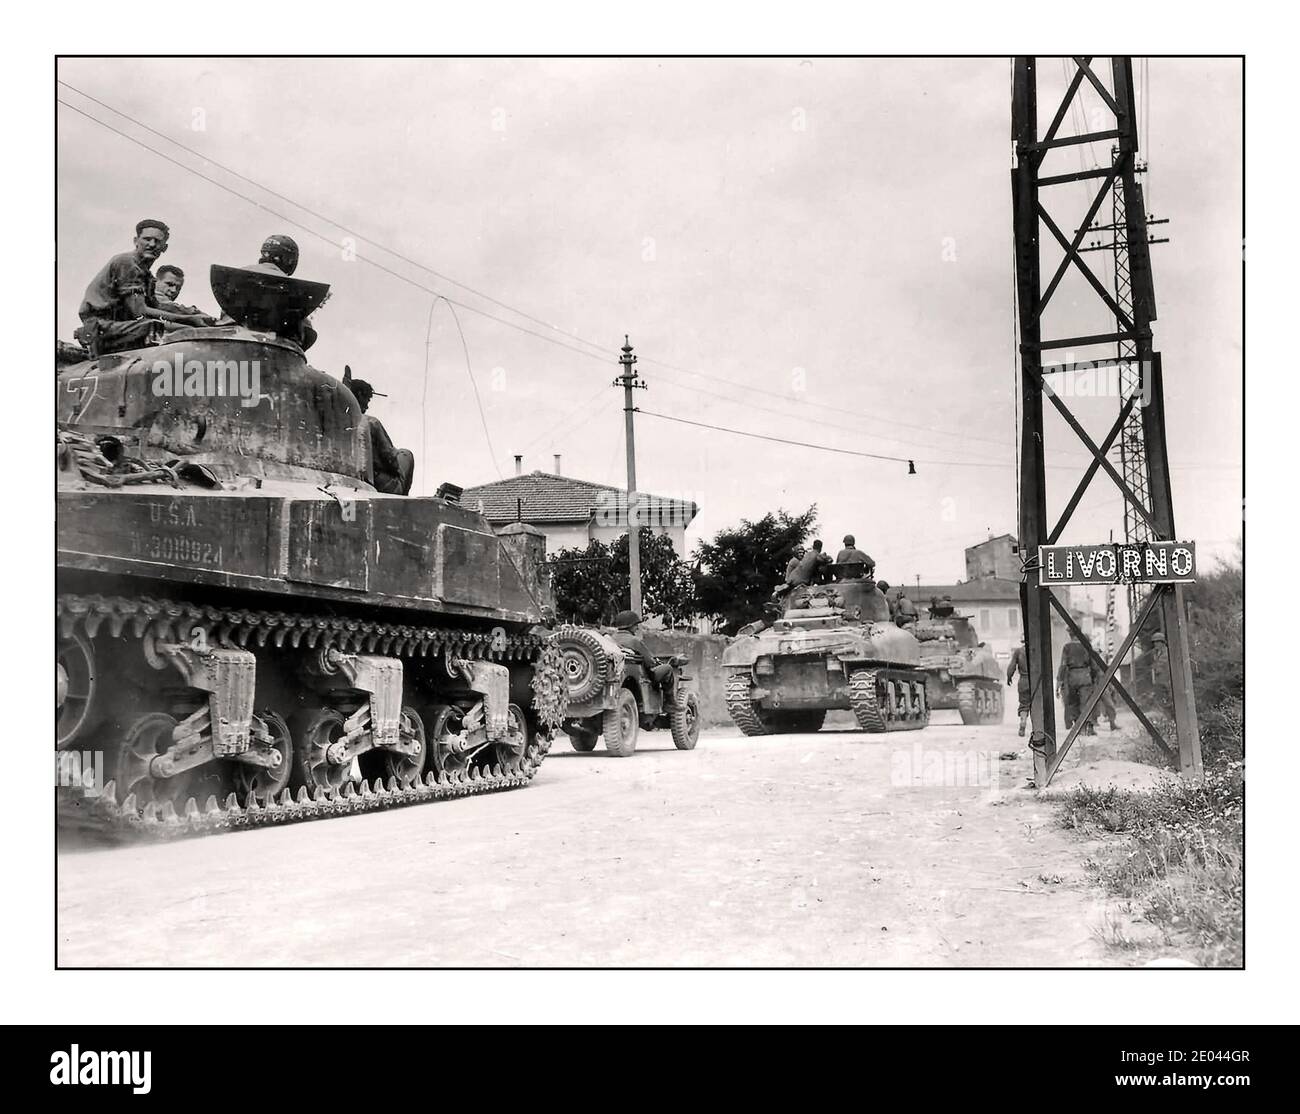 LIVORNO WW2 Anzio 34th Infantry Division. M4 Sherman tanks and Jeep entering Livorno Italy 1944 World War II Second World War  The Battle of Anzio was a battle of the Italian Campaign of World War II that took place from January 22, 1944 (beginning with the Allied amphibious landing known as Operation Shingle) to June 5, 1944 (ending with the capture of Rome). The operation was opposed unsuccessfully by German forces in the area of Anzio and Nettuno. Stock Photo